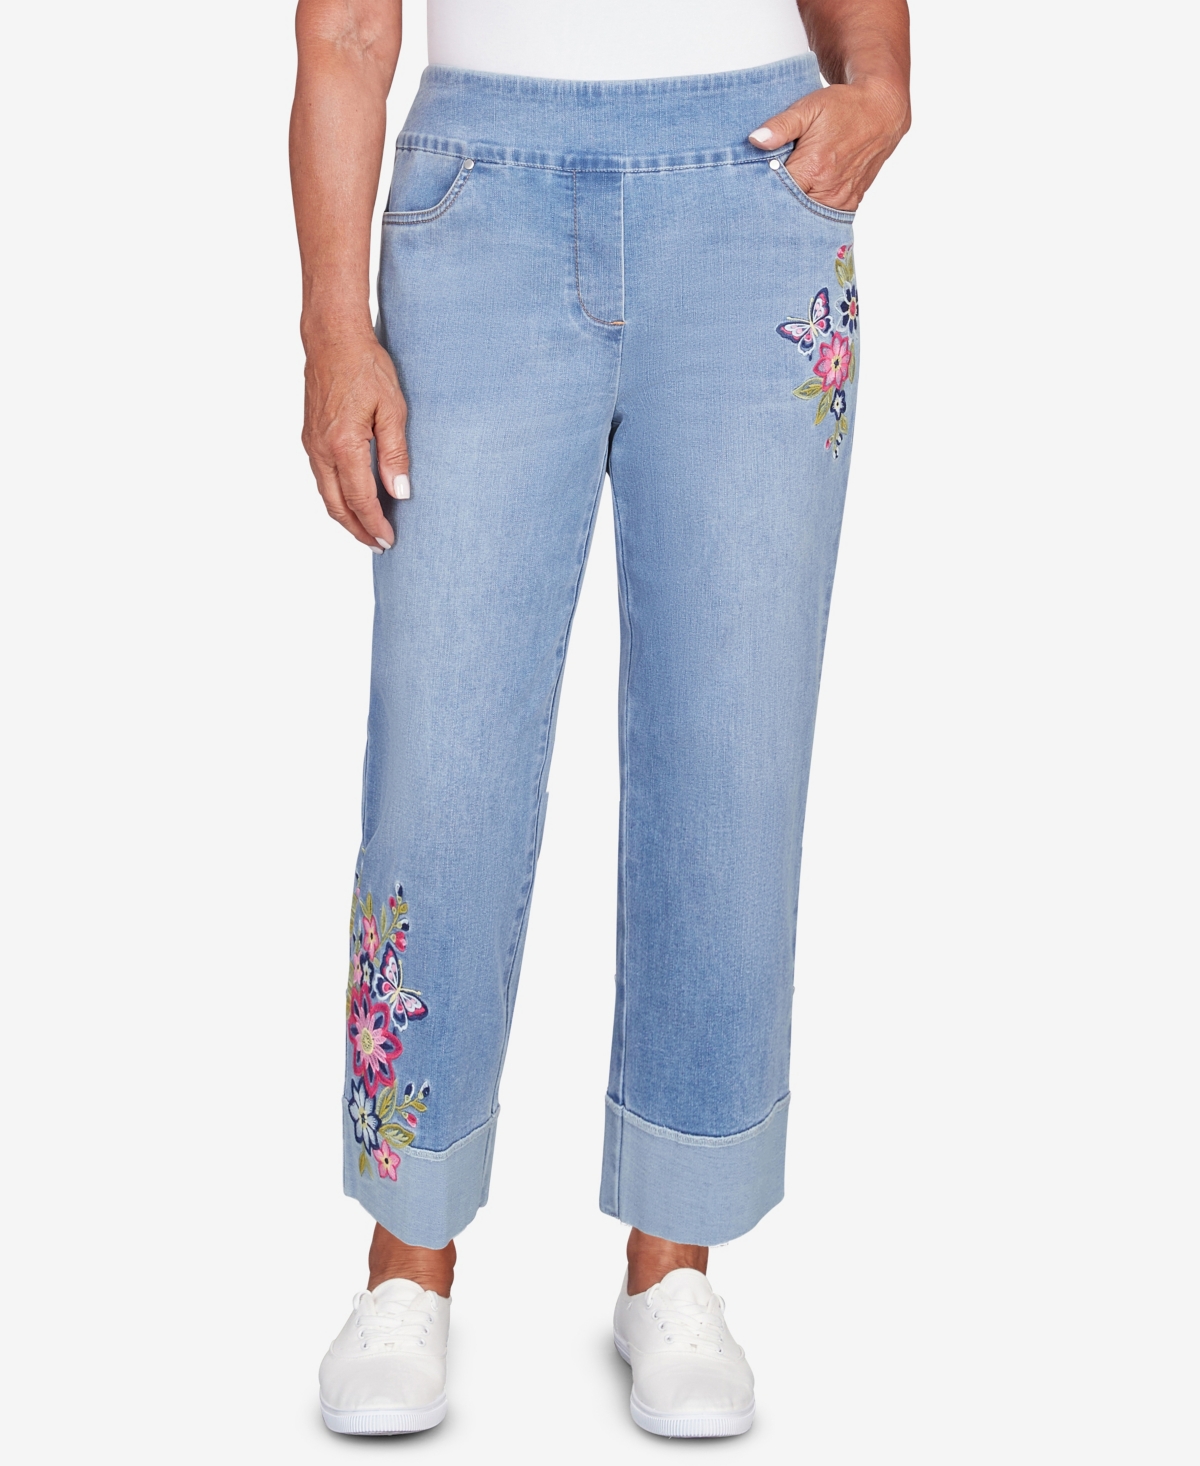 ALFRED DUNNER PETITE IN FULL BLOOM BUTTERFLY EMBROIDERED DENIM PULL ON CAPRI PANTS